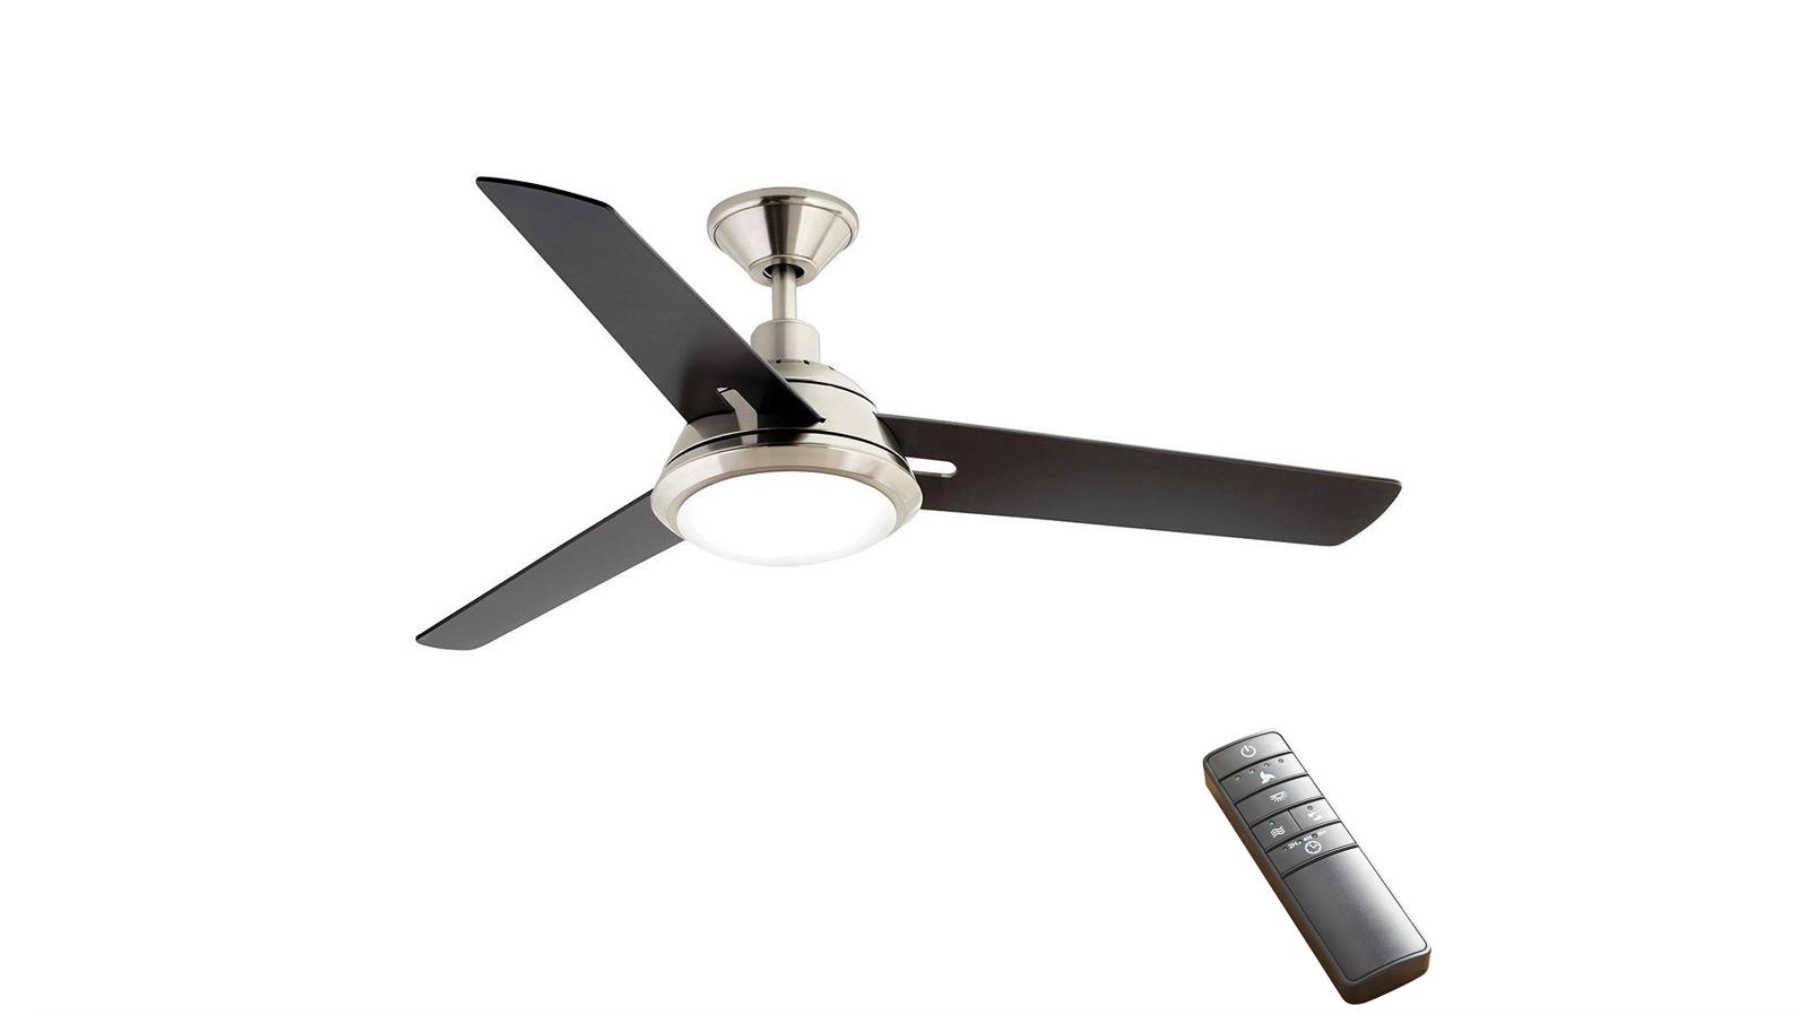 Home Decorators Collection Gardinier fan. Image: The Home Depot.